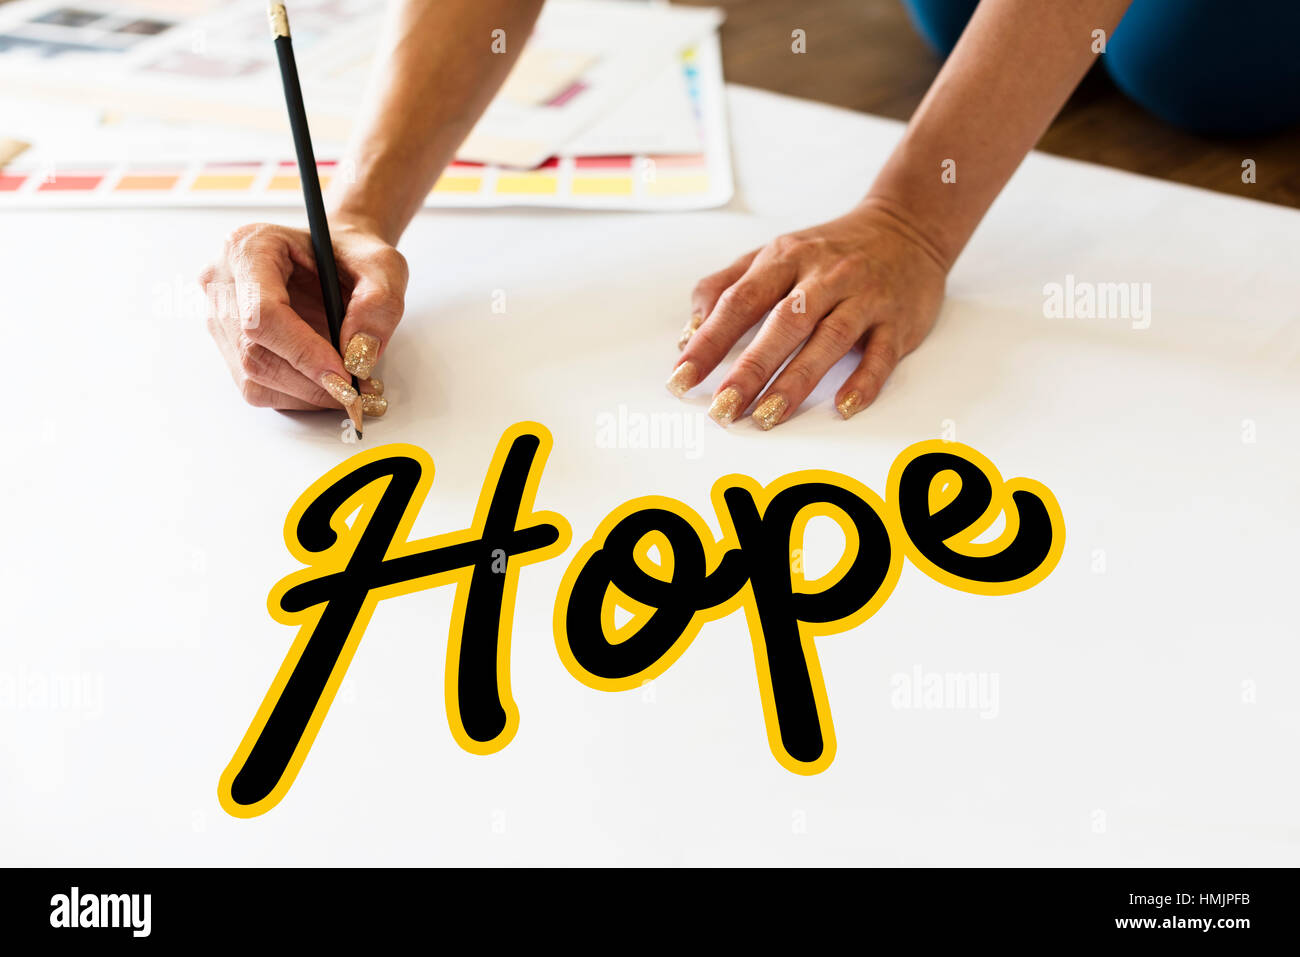 Charity Cursive Writing Word Concept Stock Photo